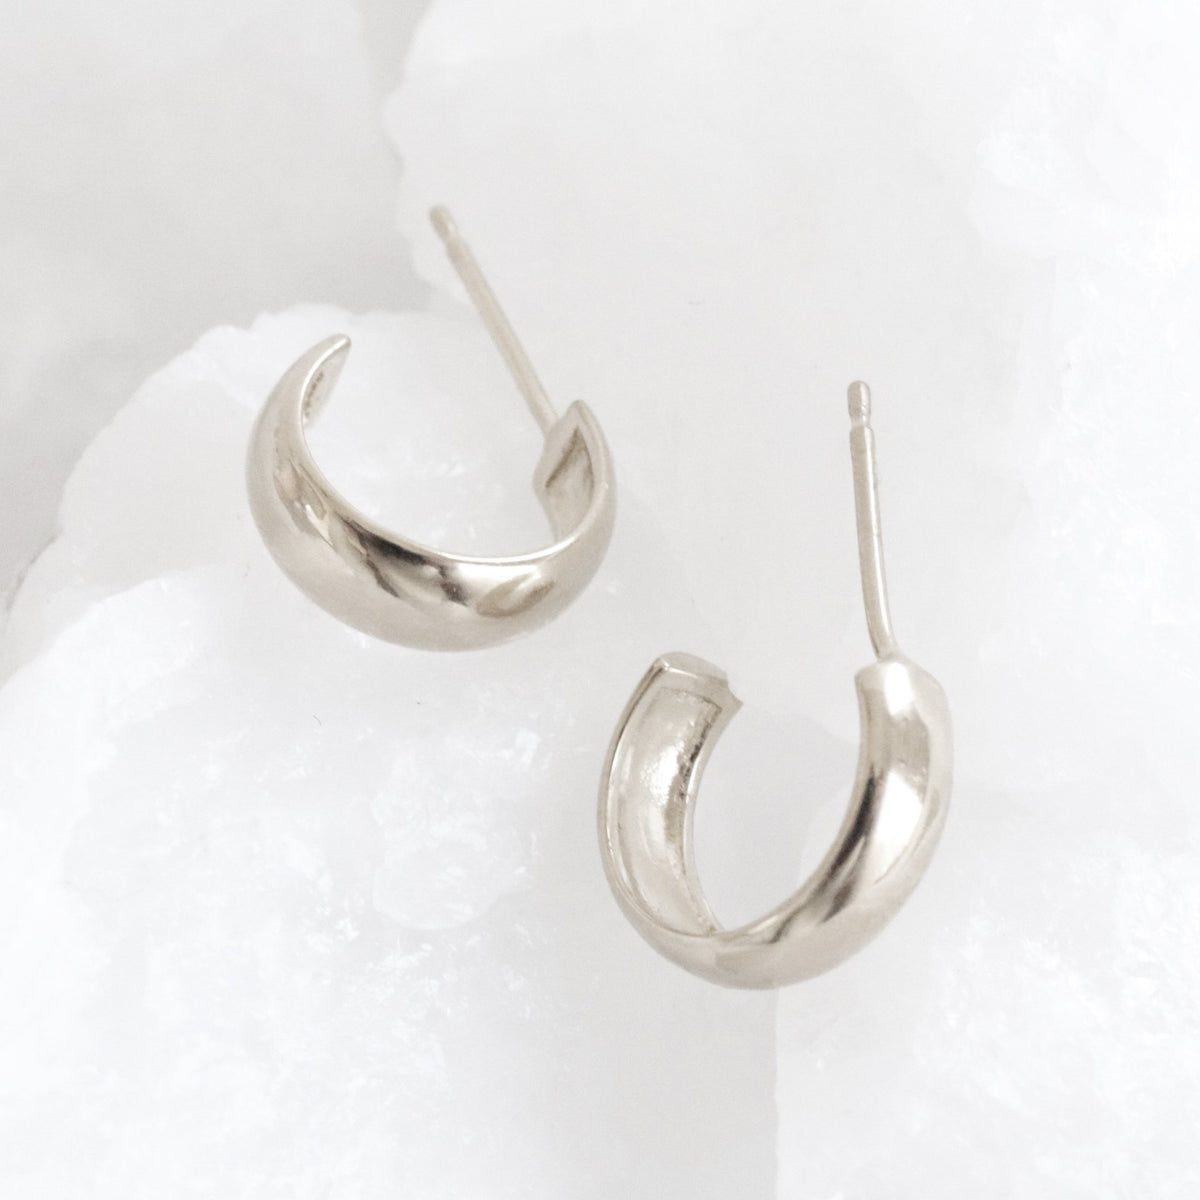 POISE HUGGIE HOOPS - SILVER - SO PRETTY CARA COTTER